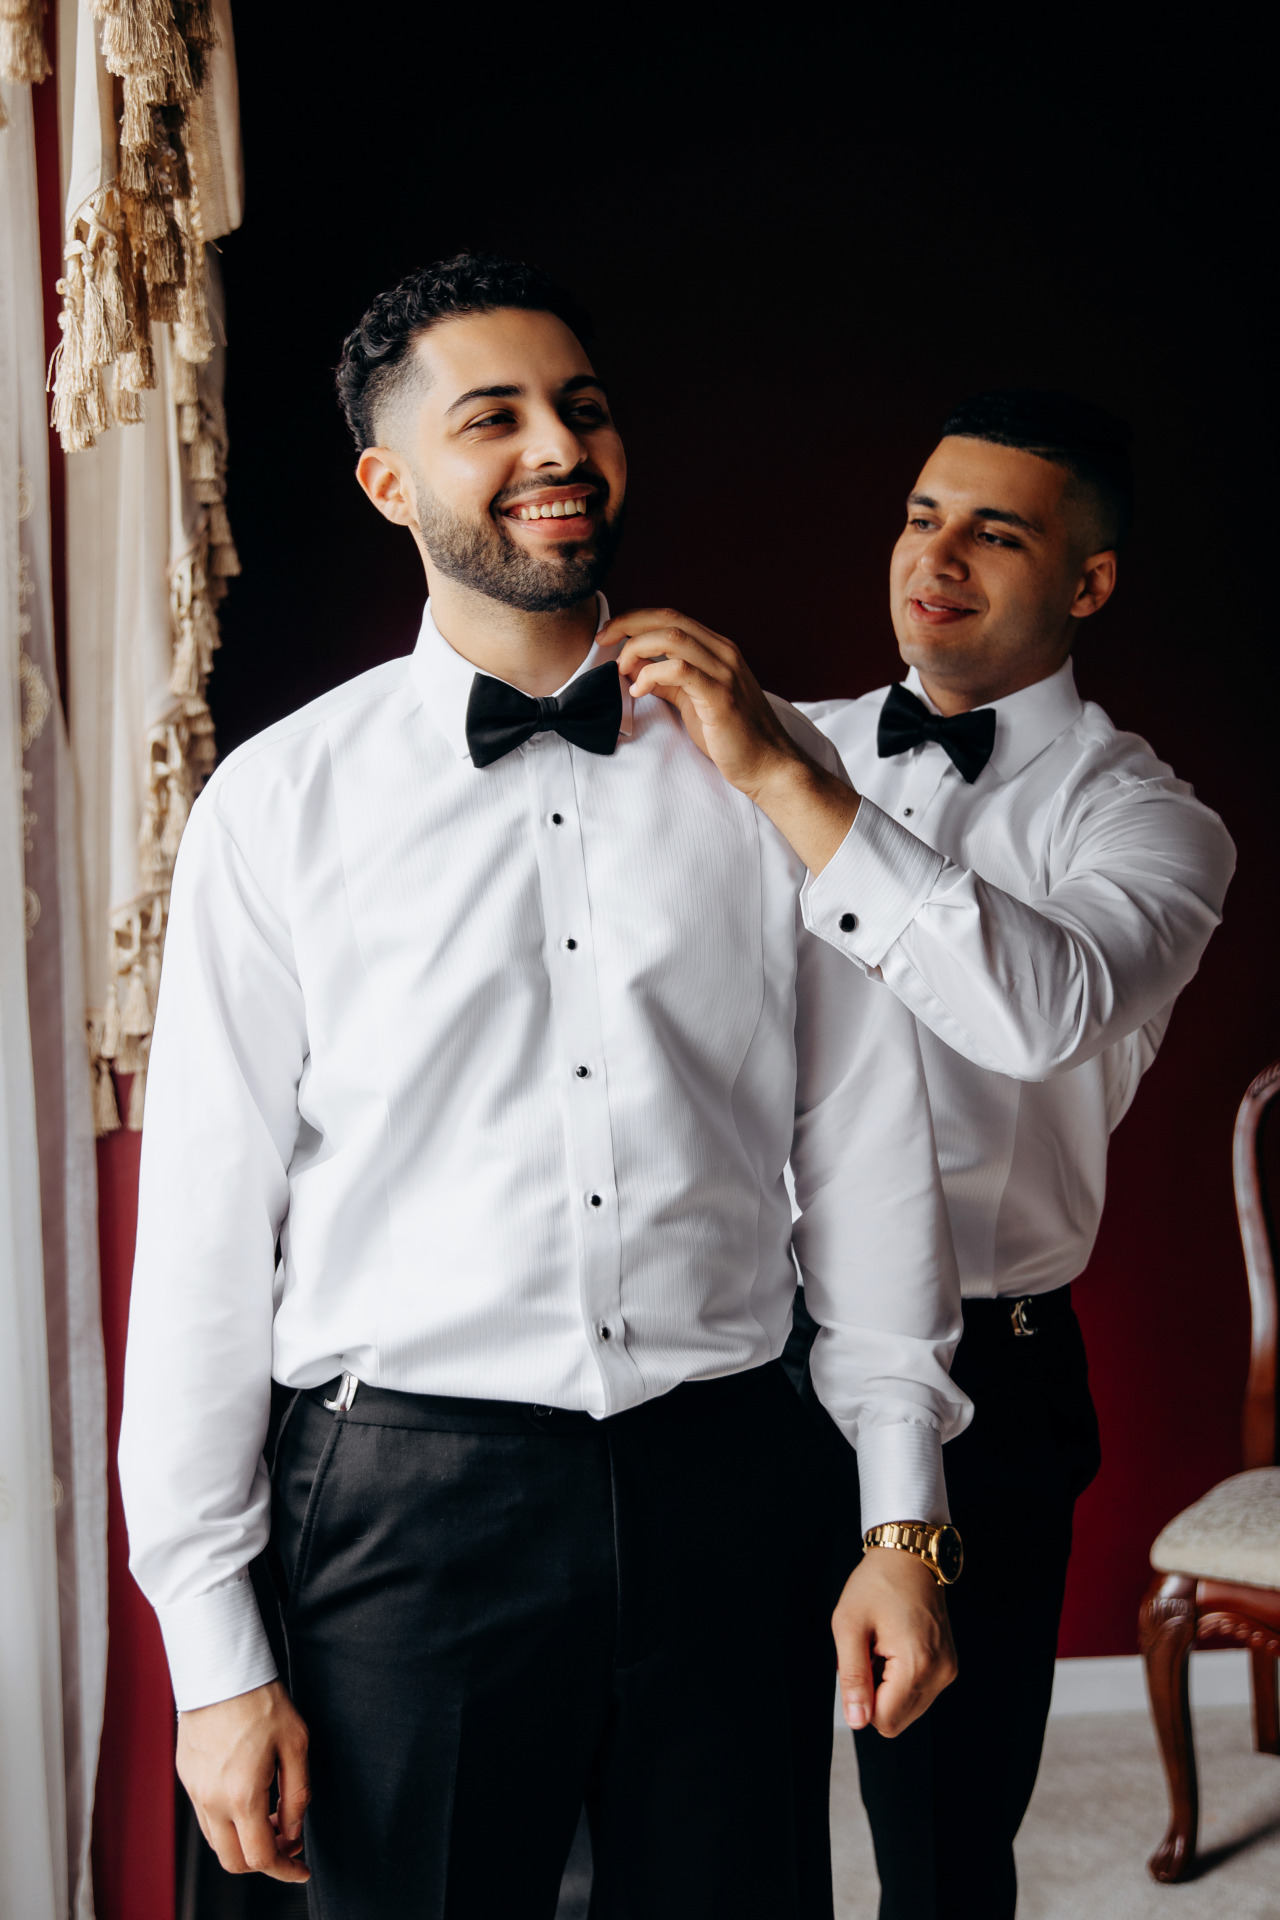 Egyprian coptic wedding editorial style in New Jersey 5